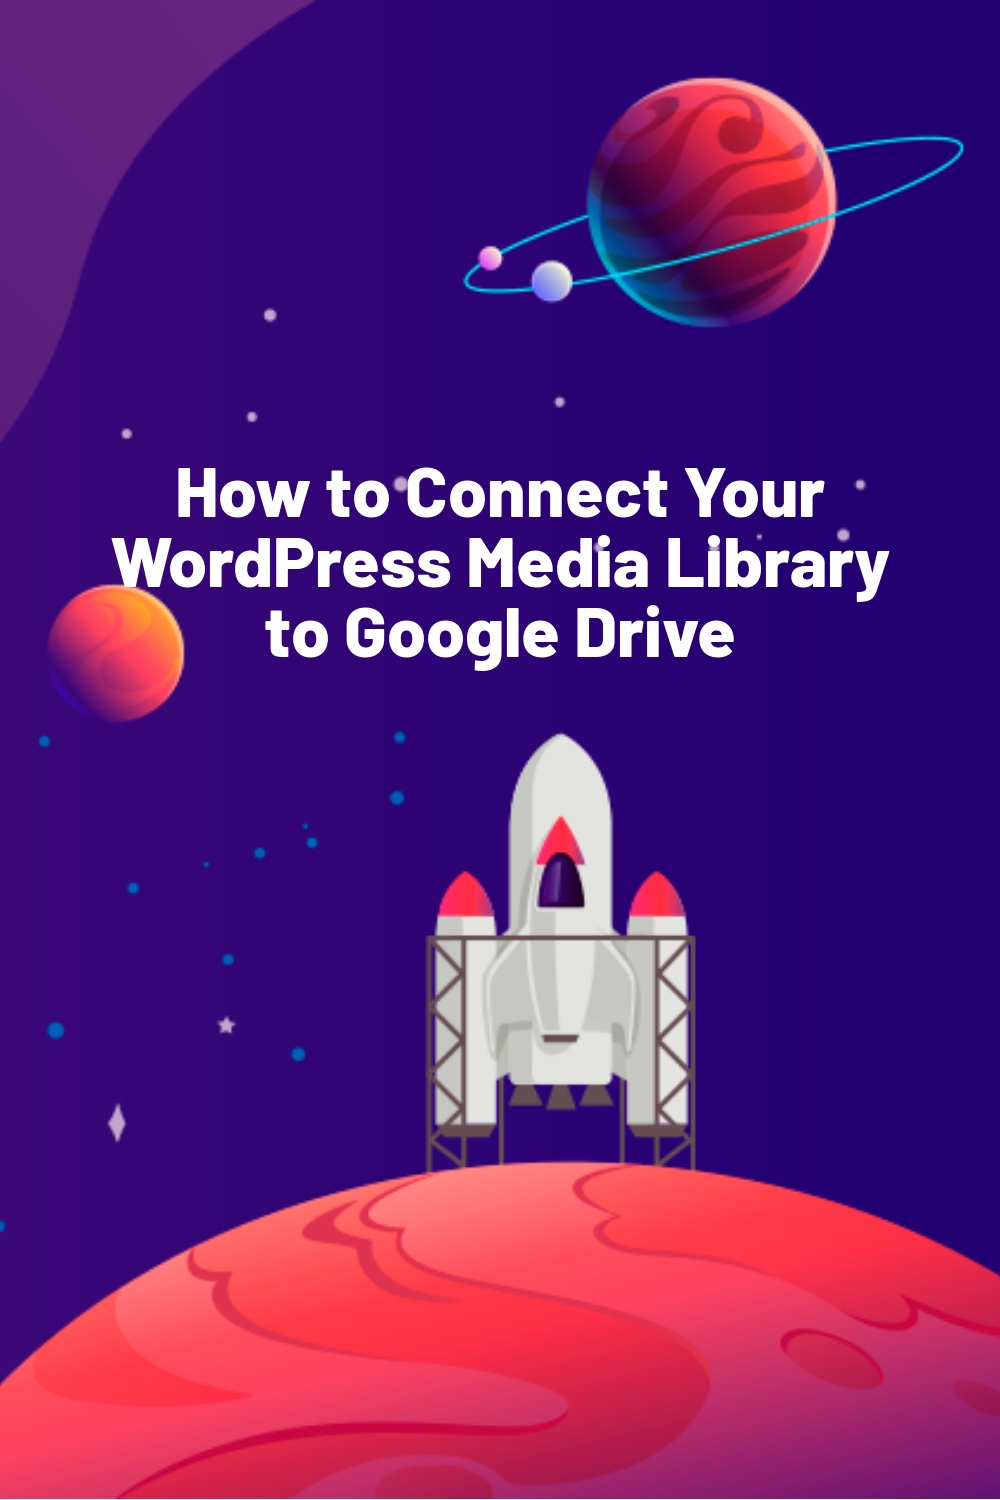 How to Connect Your WordPress Media Library to Google Drive